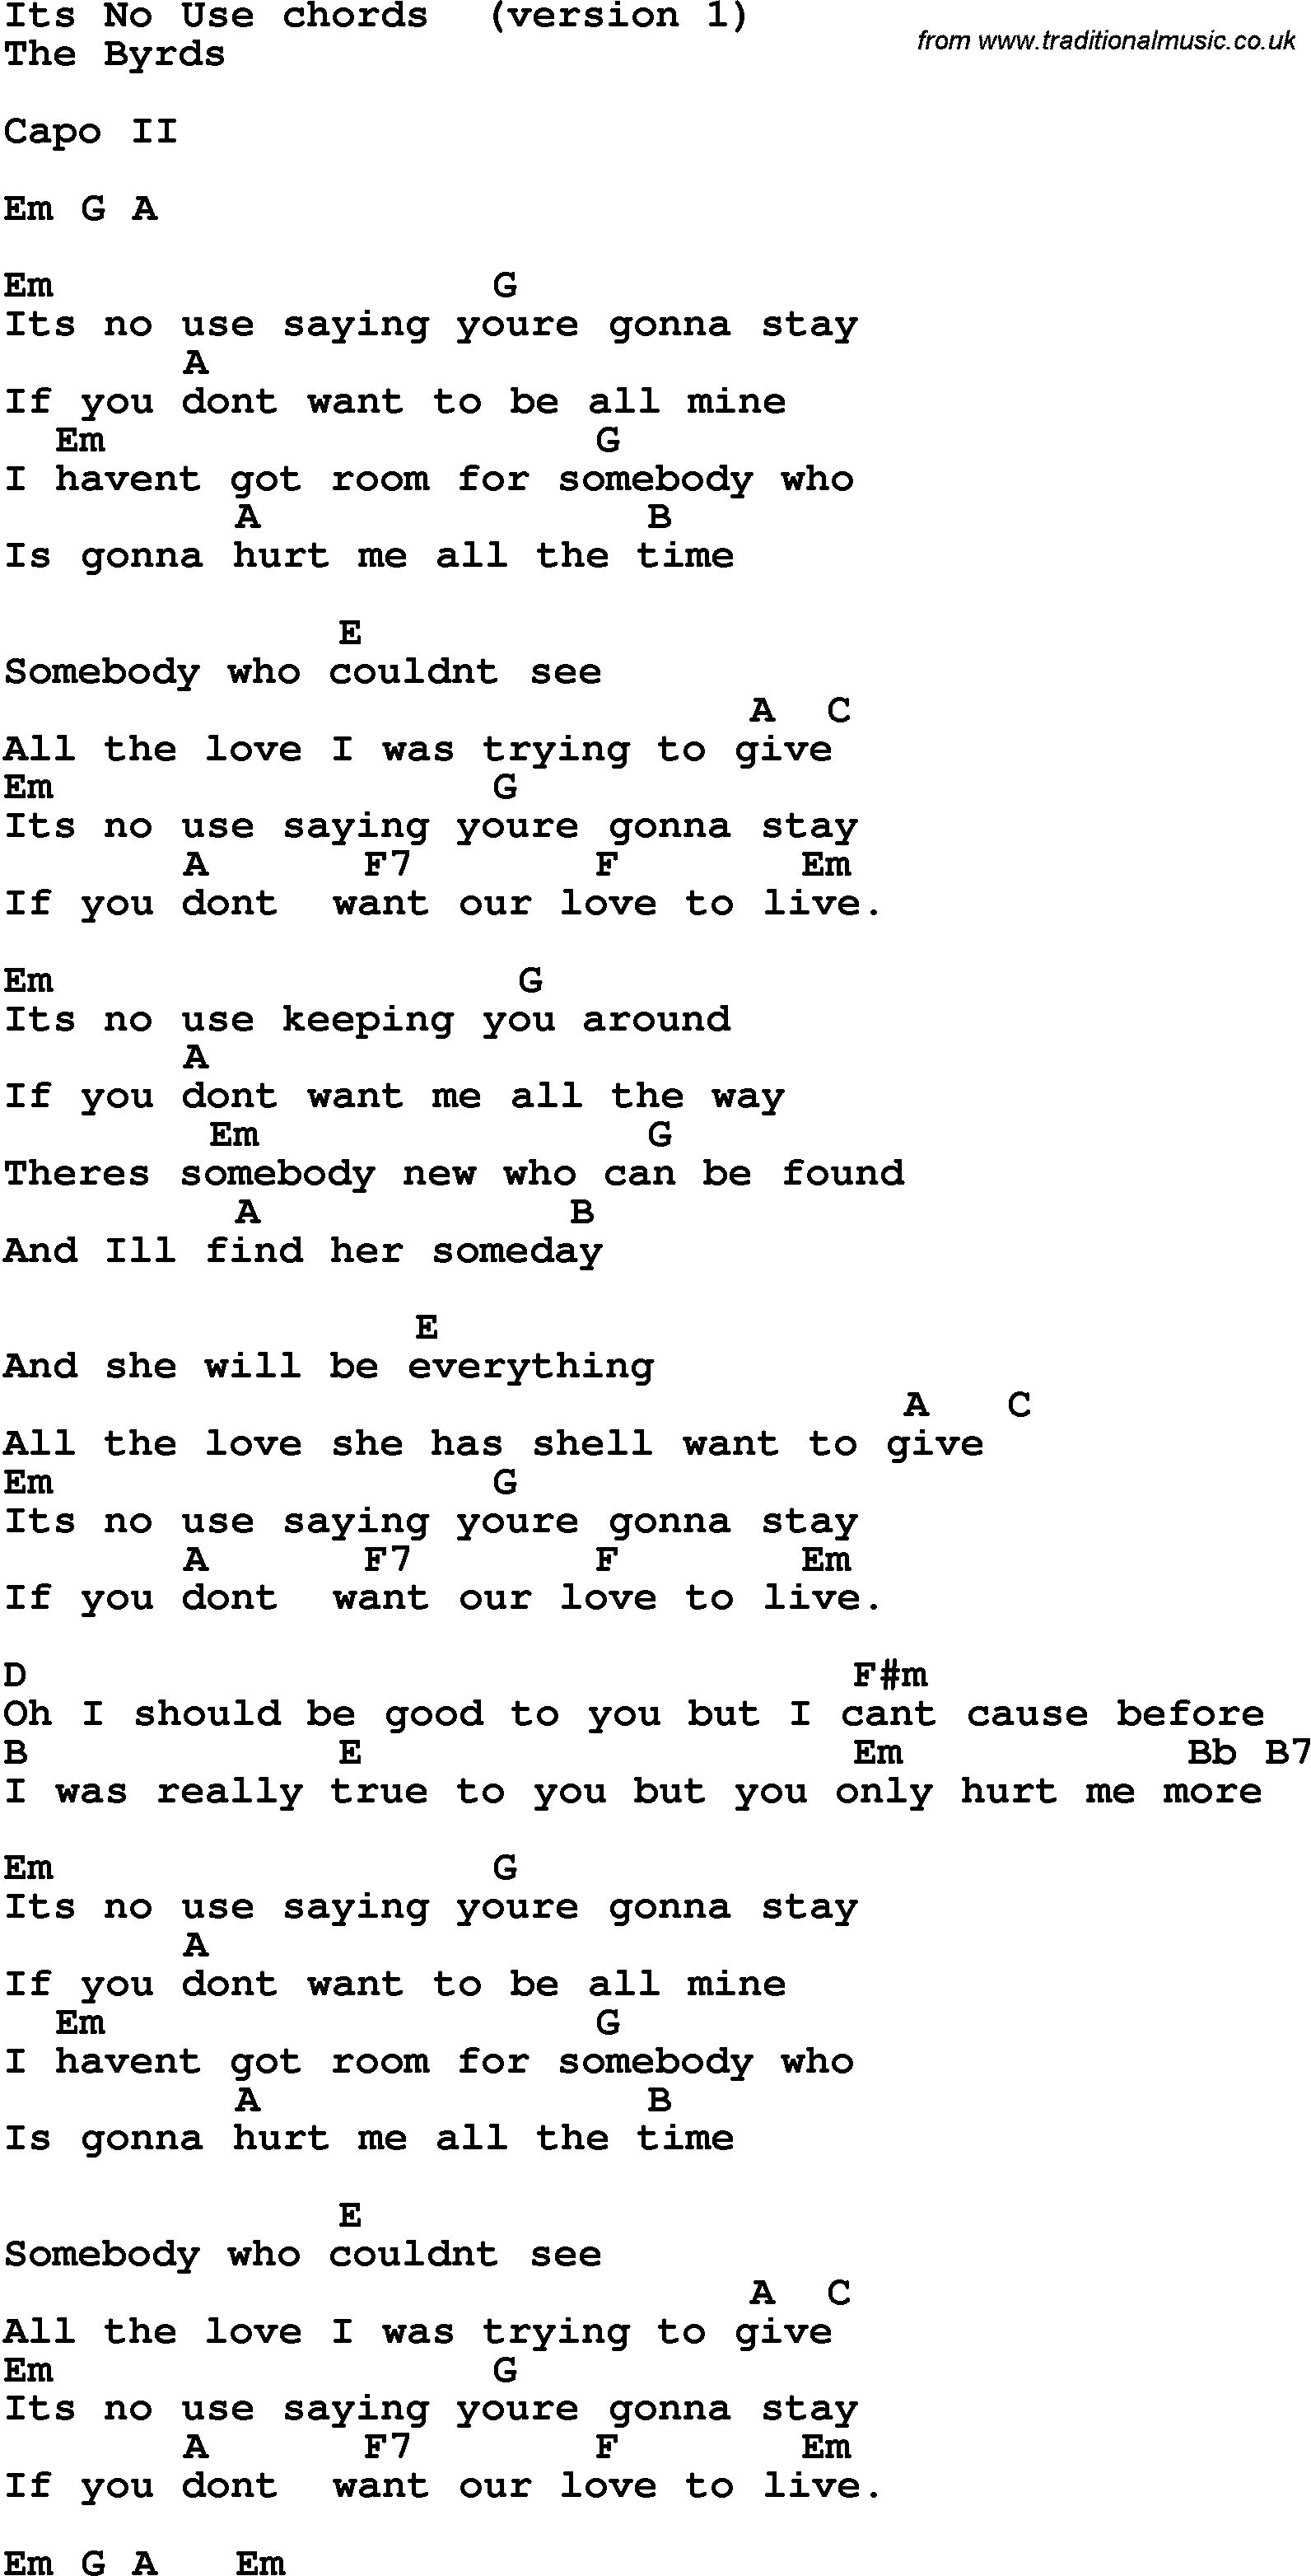 Song Lyrics with guitar chords for It's No Use